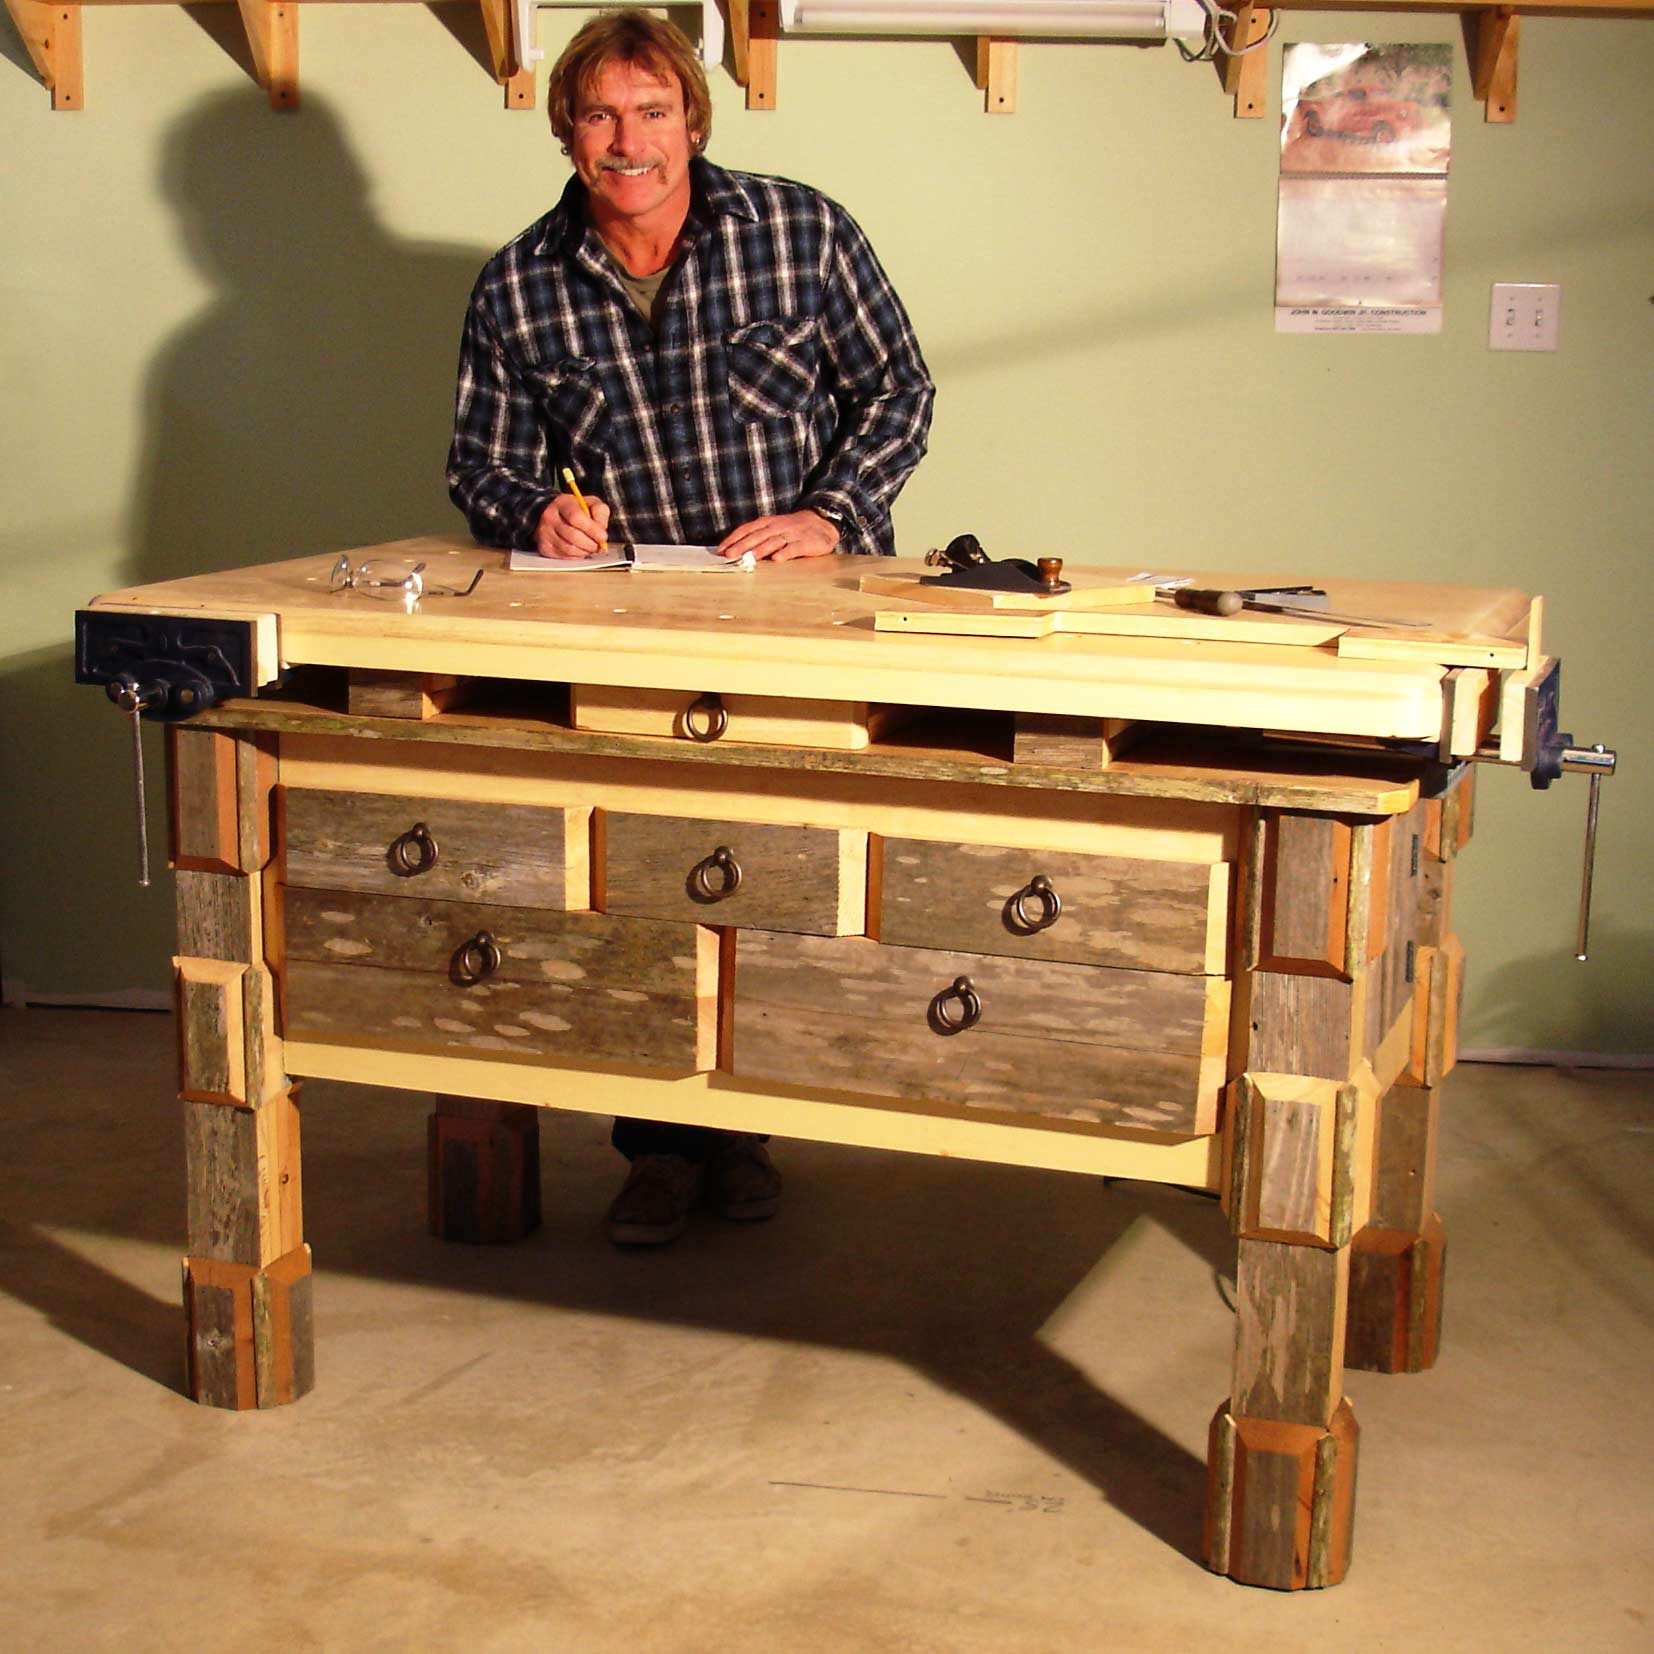 Shop Woodworking Projects